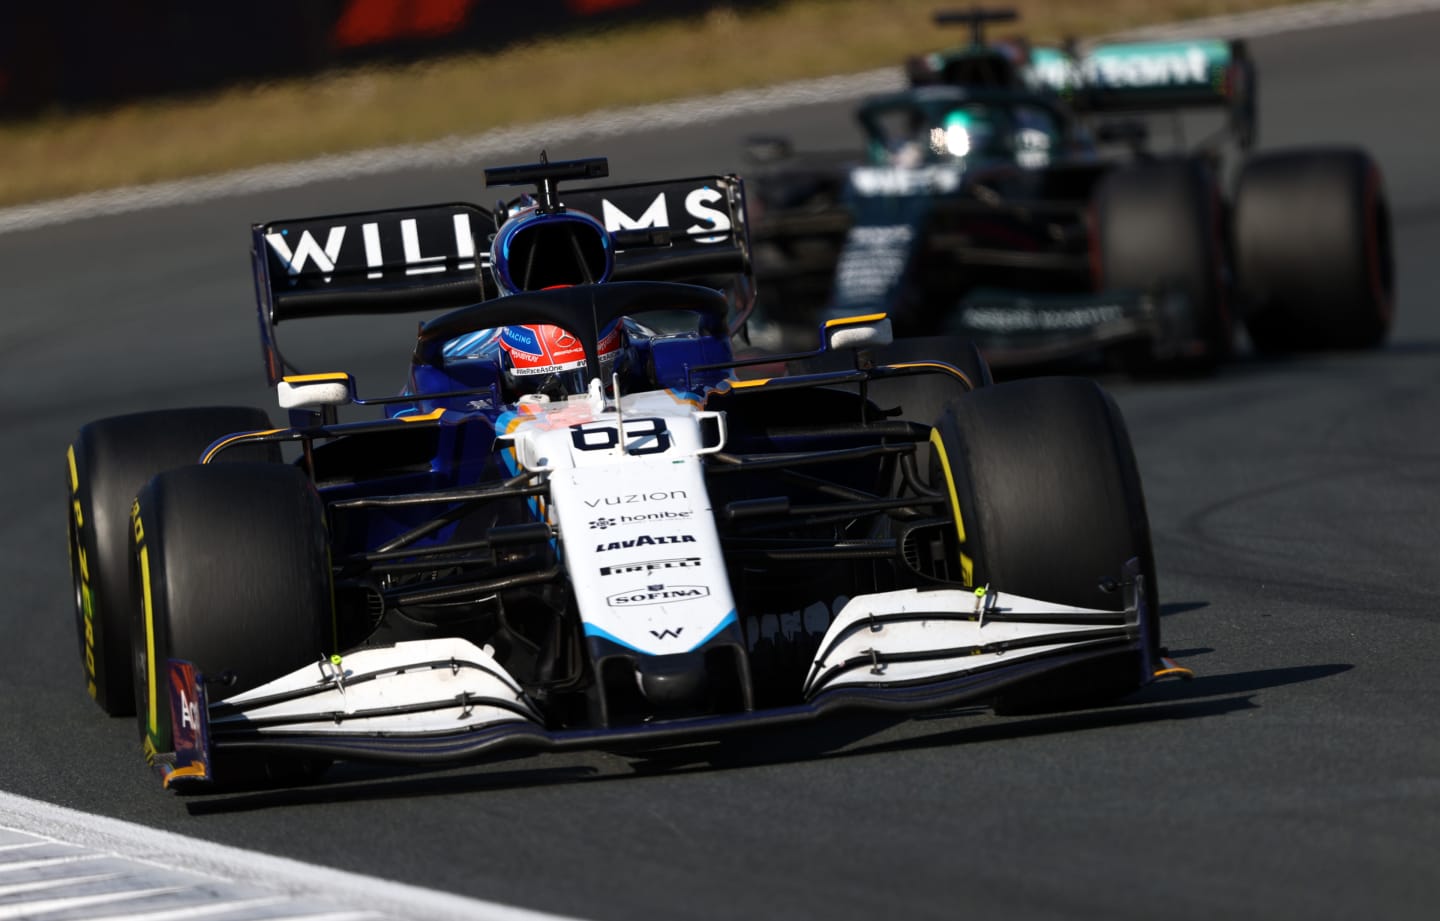 ZANDVOORT, NETHERLANDS - SEPTEMBER 05: George Russell of Great Britain driving the (63) Williams Racing FW43B Mercedes during the F1 Grand Prix of The Netherlands at Circuit Zandvoort on September 05, 2021 in Zandvoort, Netherlands. (Photo by Bryn Lennon/Getty Images)